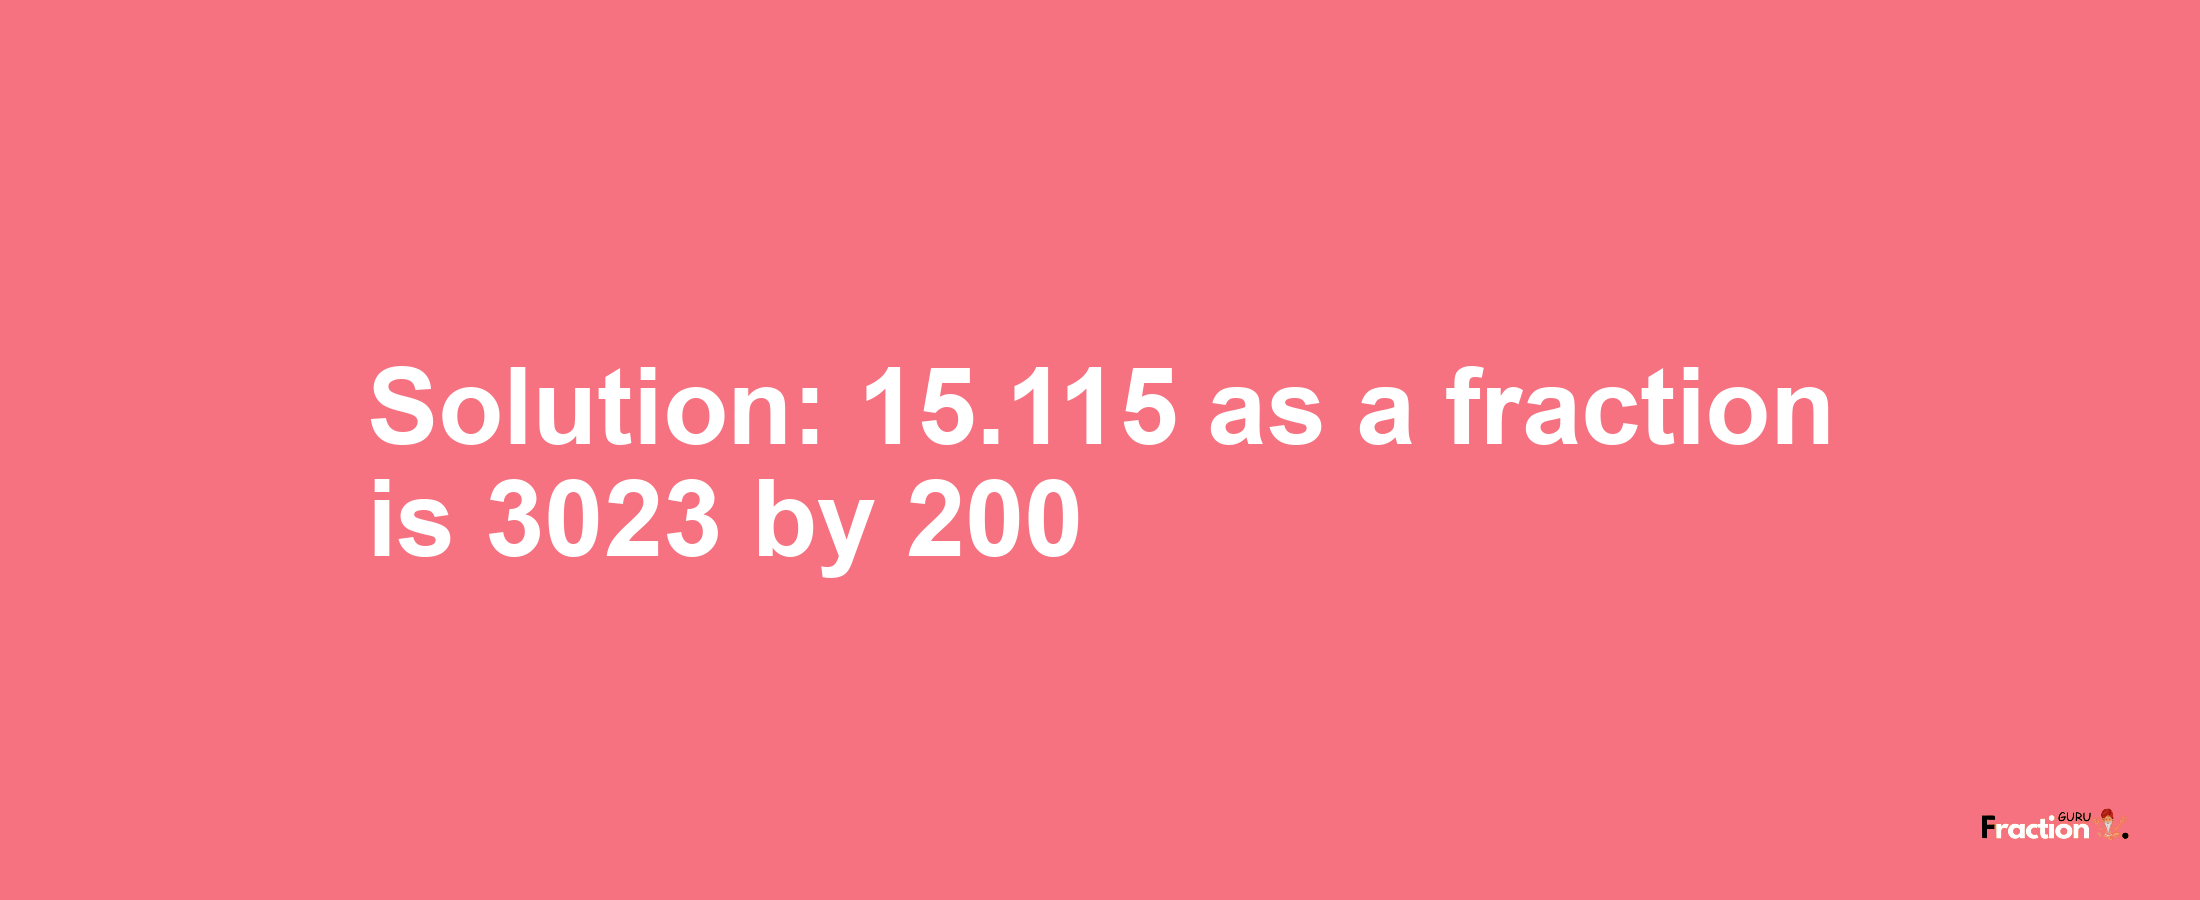 Solution:15.115 as a fraction is 3023/200